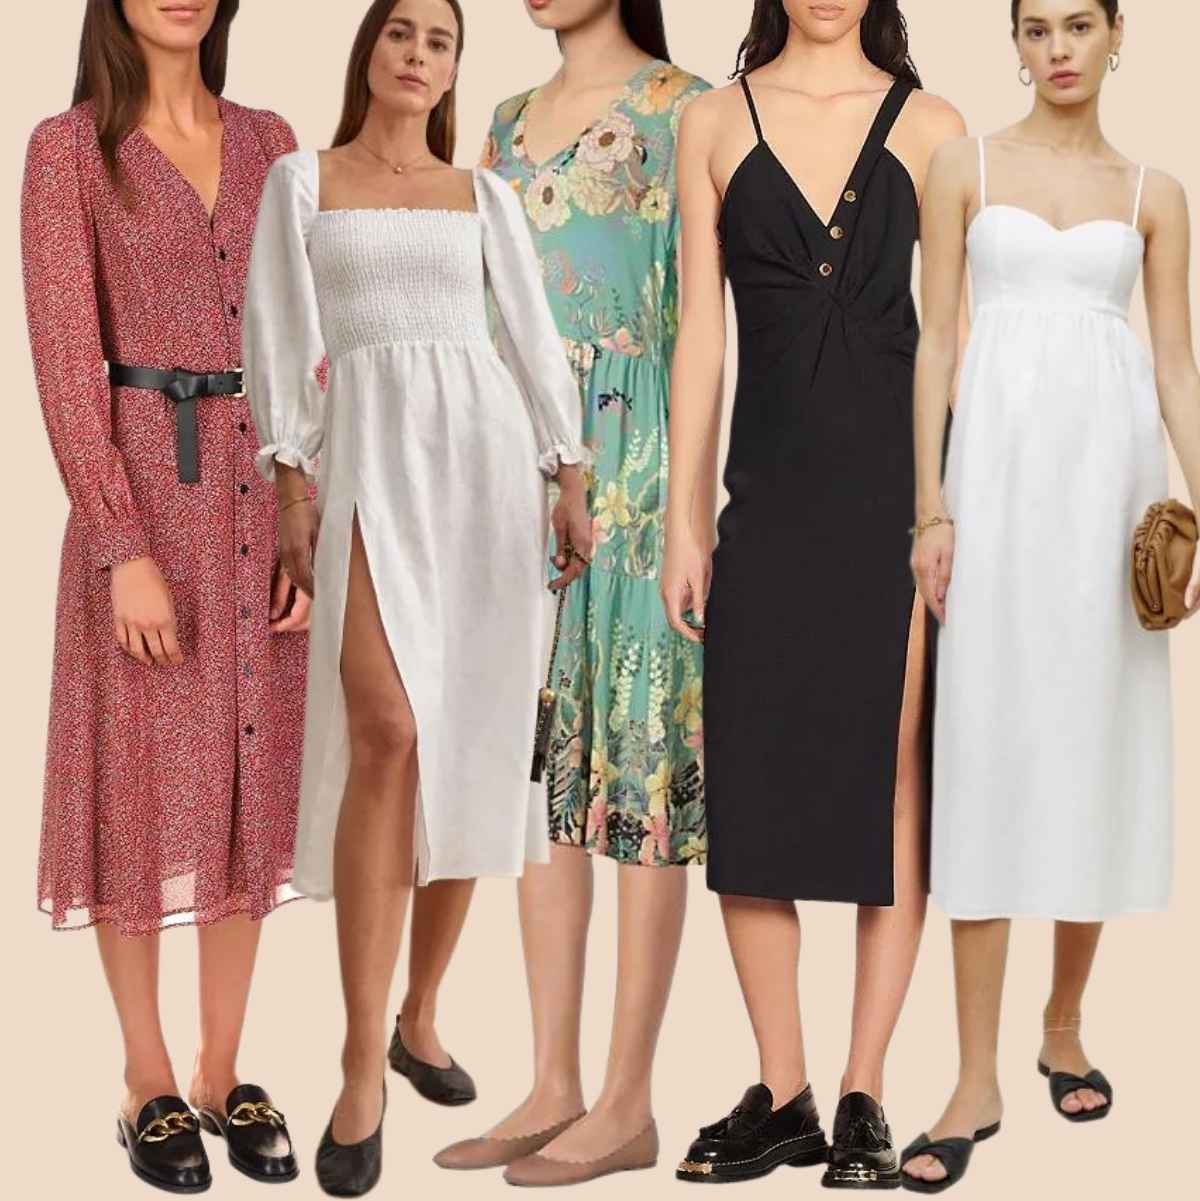 Collage of 5 wearing flat shoes with midi dresses.